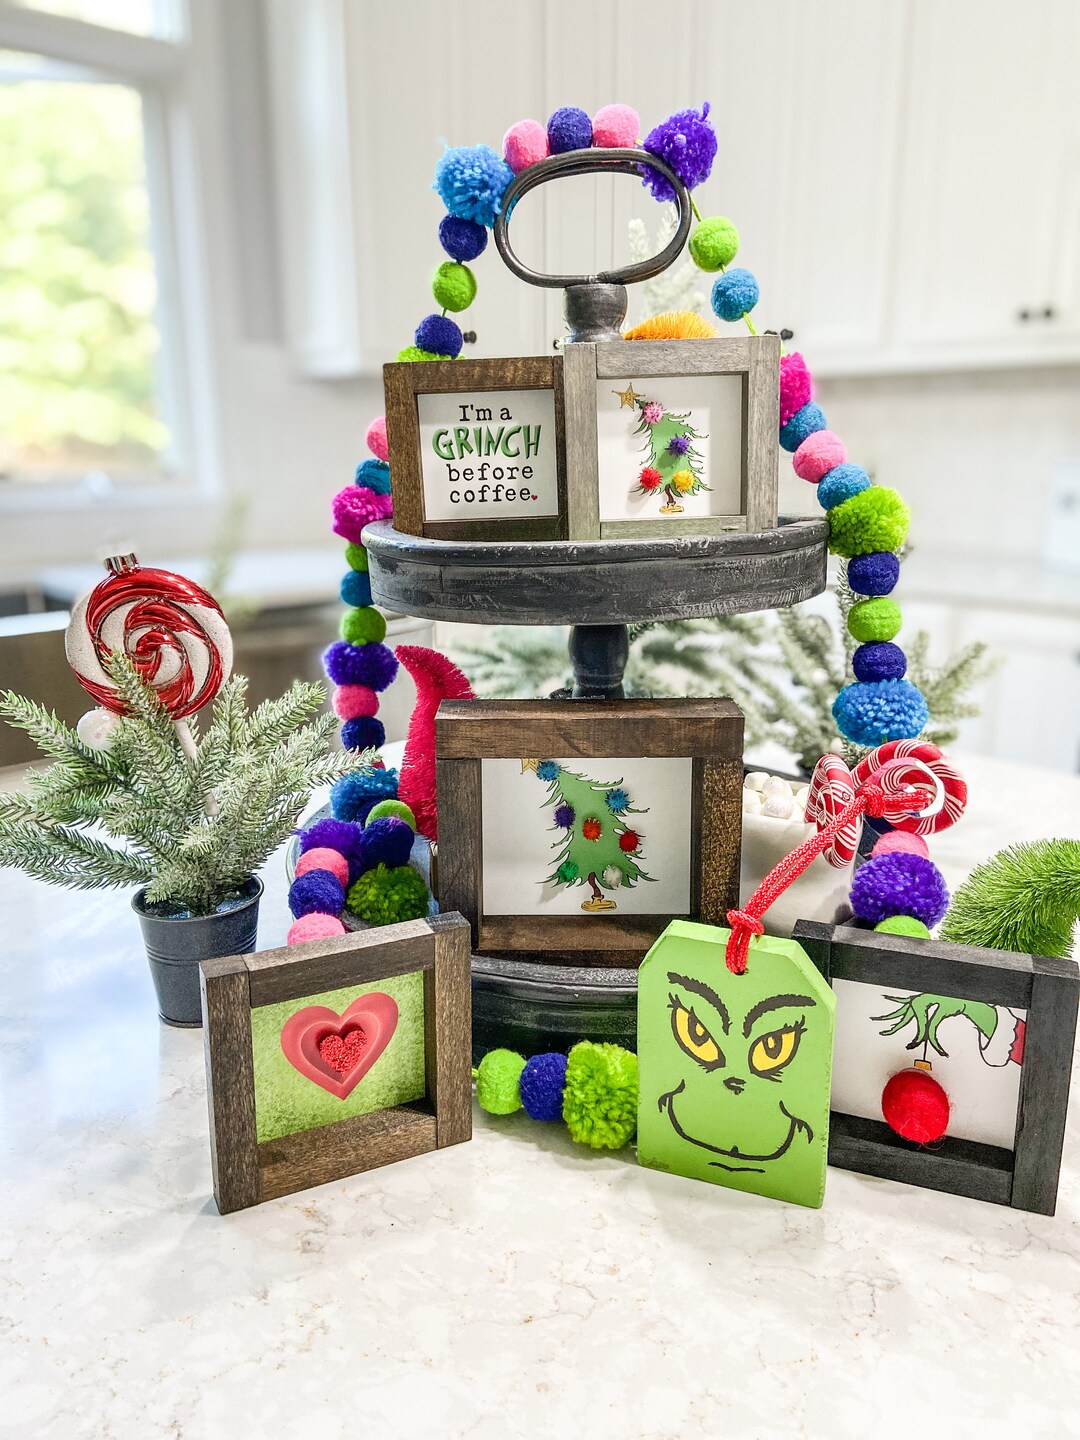 Grinch Christmas Decorations Indoor, 2 PCS Paper Cups Filled with  Artificial Whipped Cream for Table, Tiered Tray, Kitchen Coffee Bar Grinch  Decor